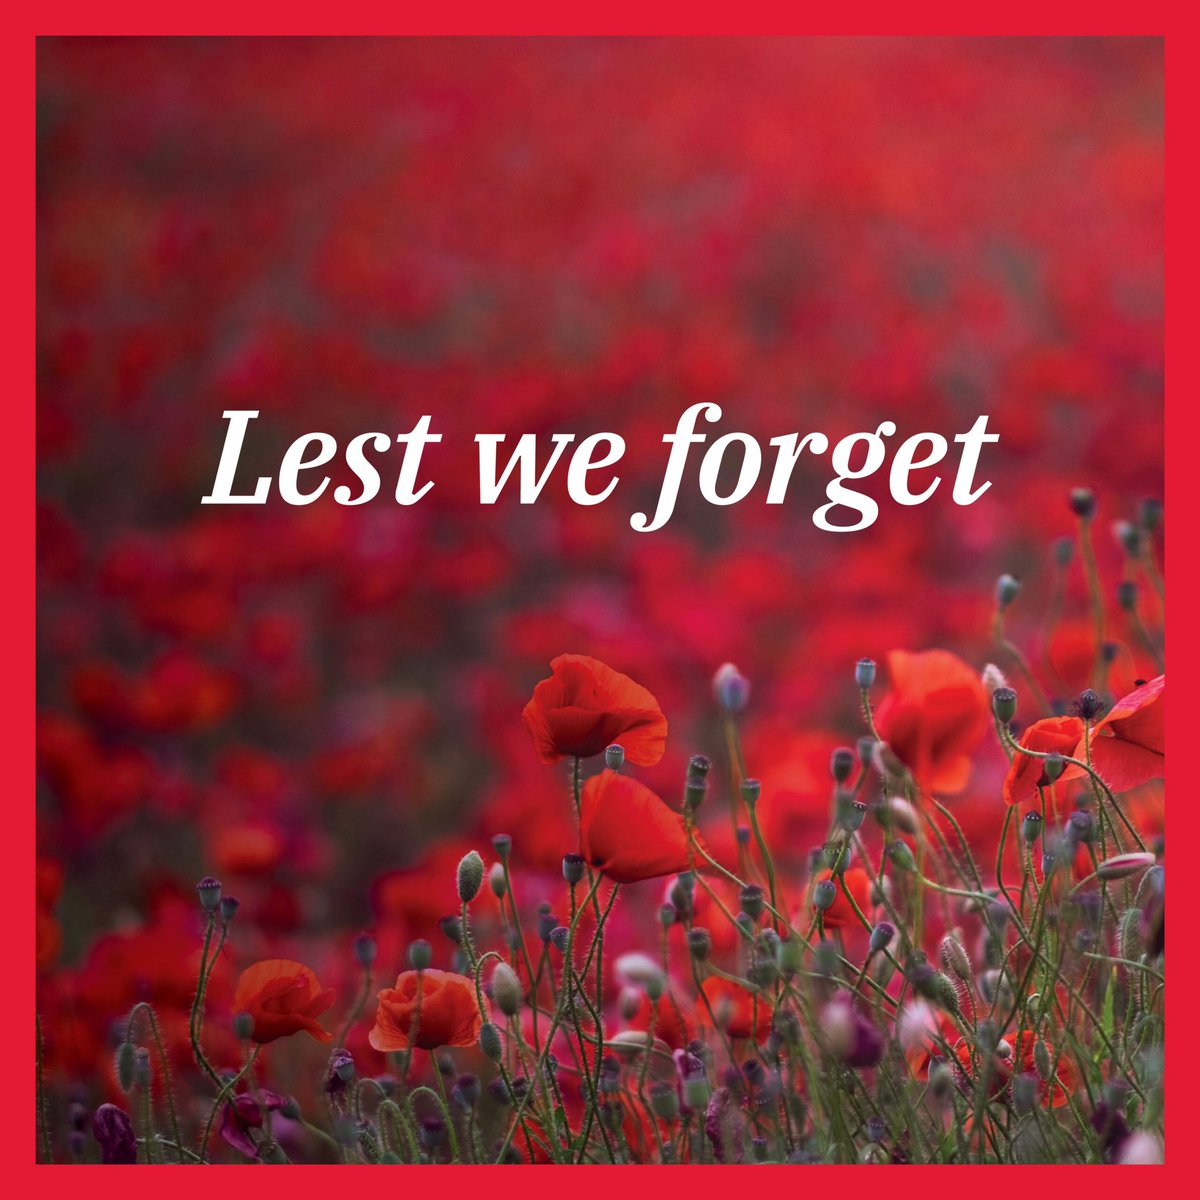 Today, on Remembrance Day, we pause to honor and express our deepest gratitude to the brave men and women who have served in the Canadian military. At Axon Canada, we thank all veterans for their selfless service and commitment to preserving our nation's values and liberties 🇨🇦